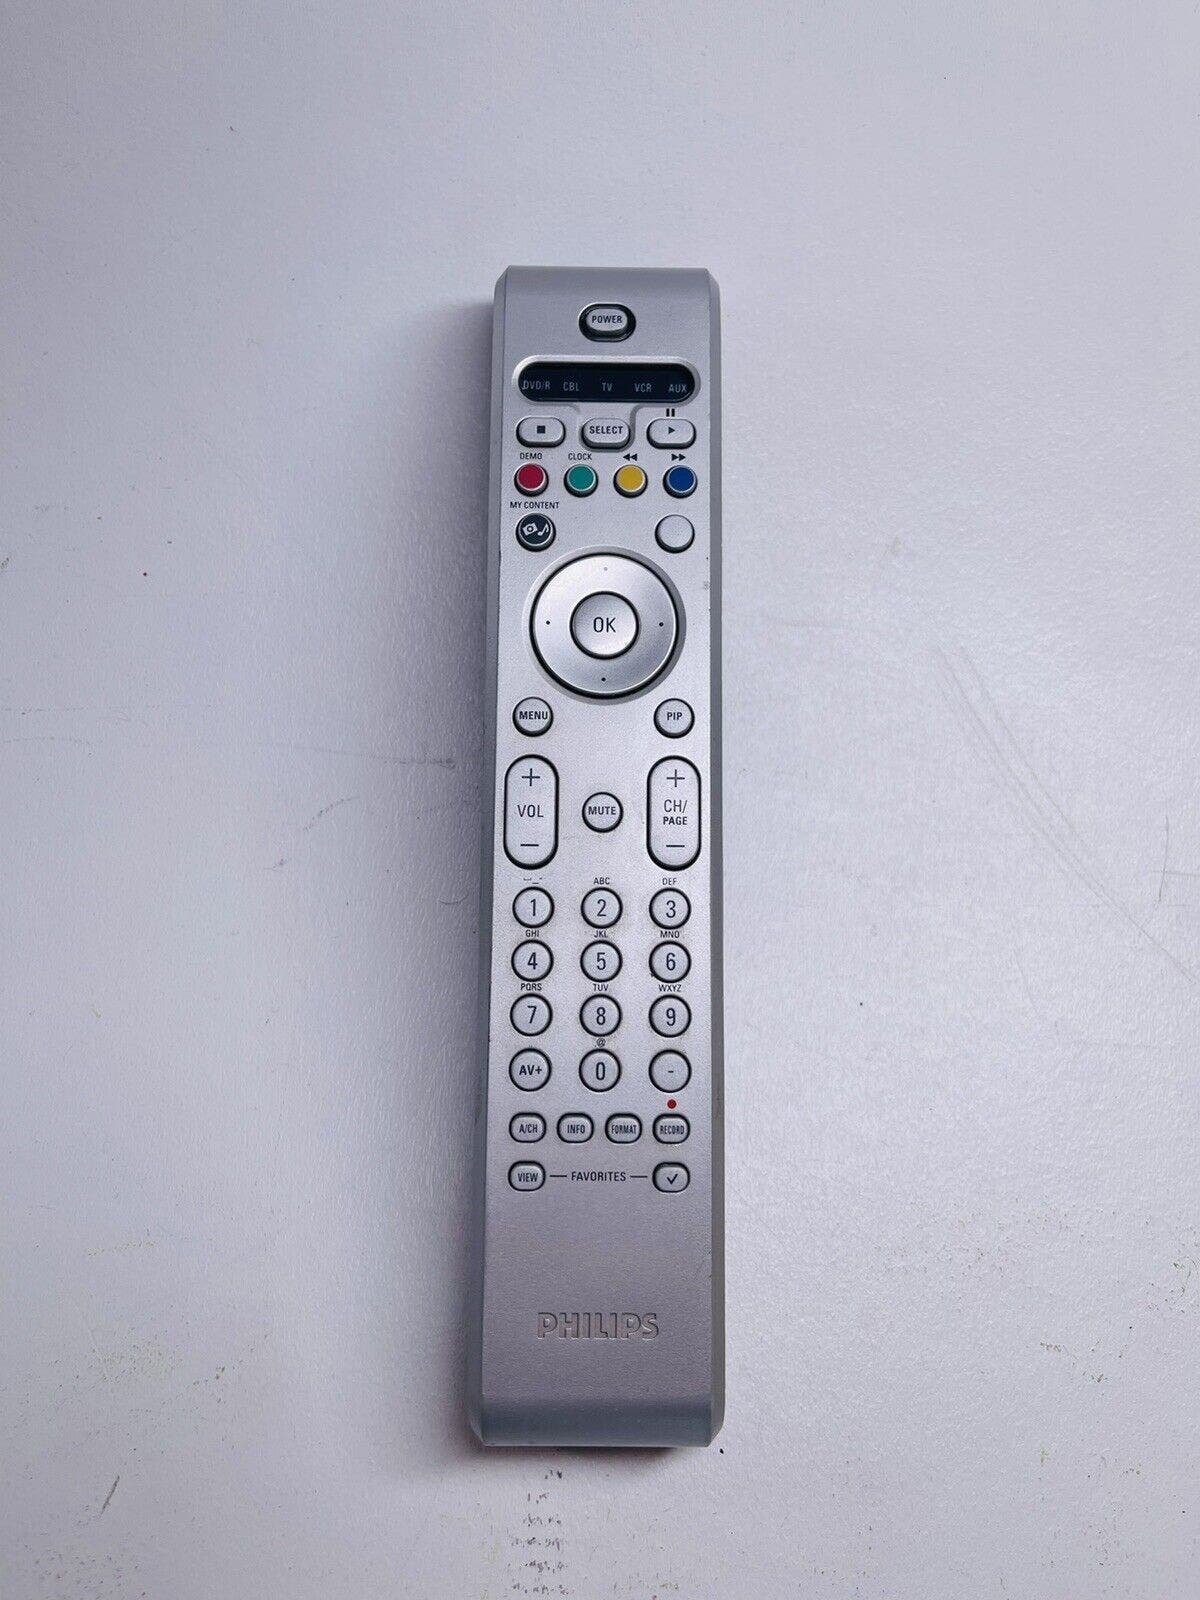 Remote Control Philips Genuine RC4345/01B Electronics Accessories Home - $12.27